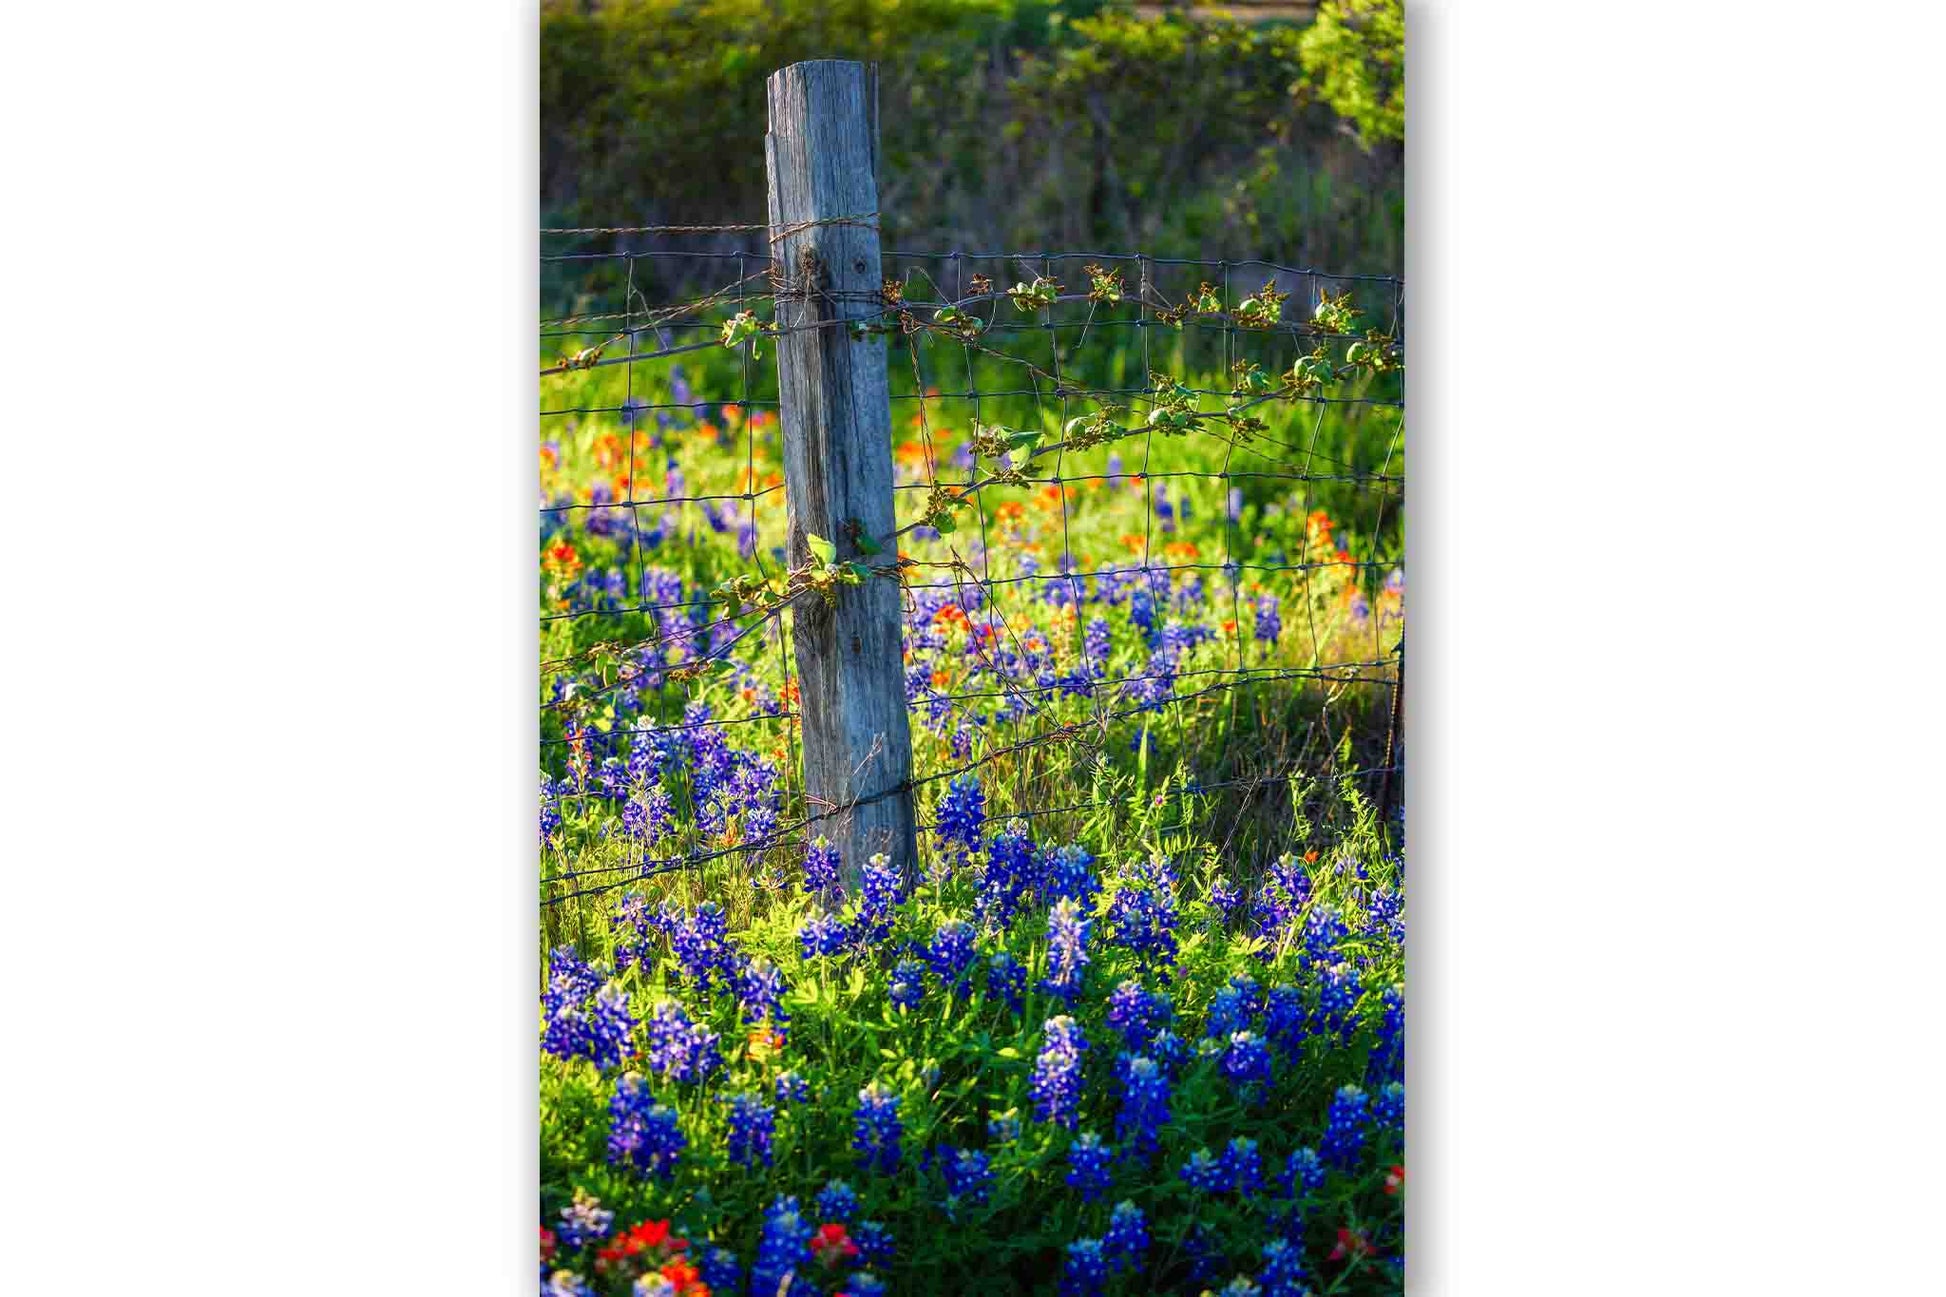 Vertical country photography print of a fence post surrounded by bluebonnets and Indian paintbrush wildflowers on a spring day in Texas by Sean Ramsey of Southern Plains Photography.